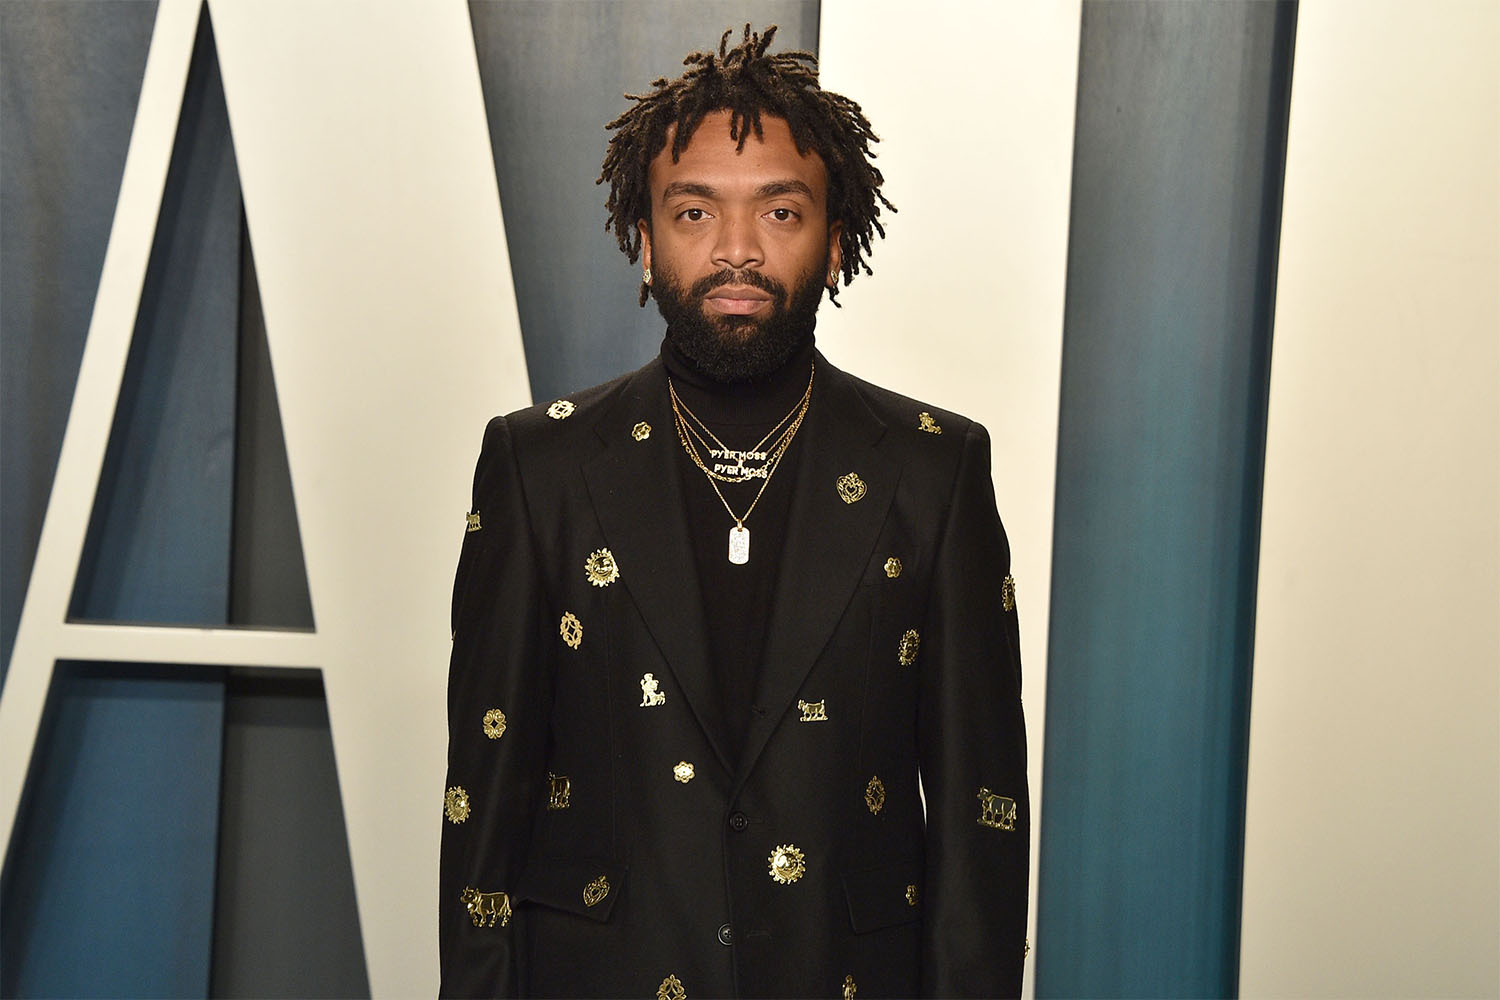 Pyer Moss founder Kerby Jean-Raymond at the Vanity Fair Oscar After Party in 2020.